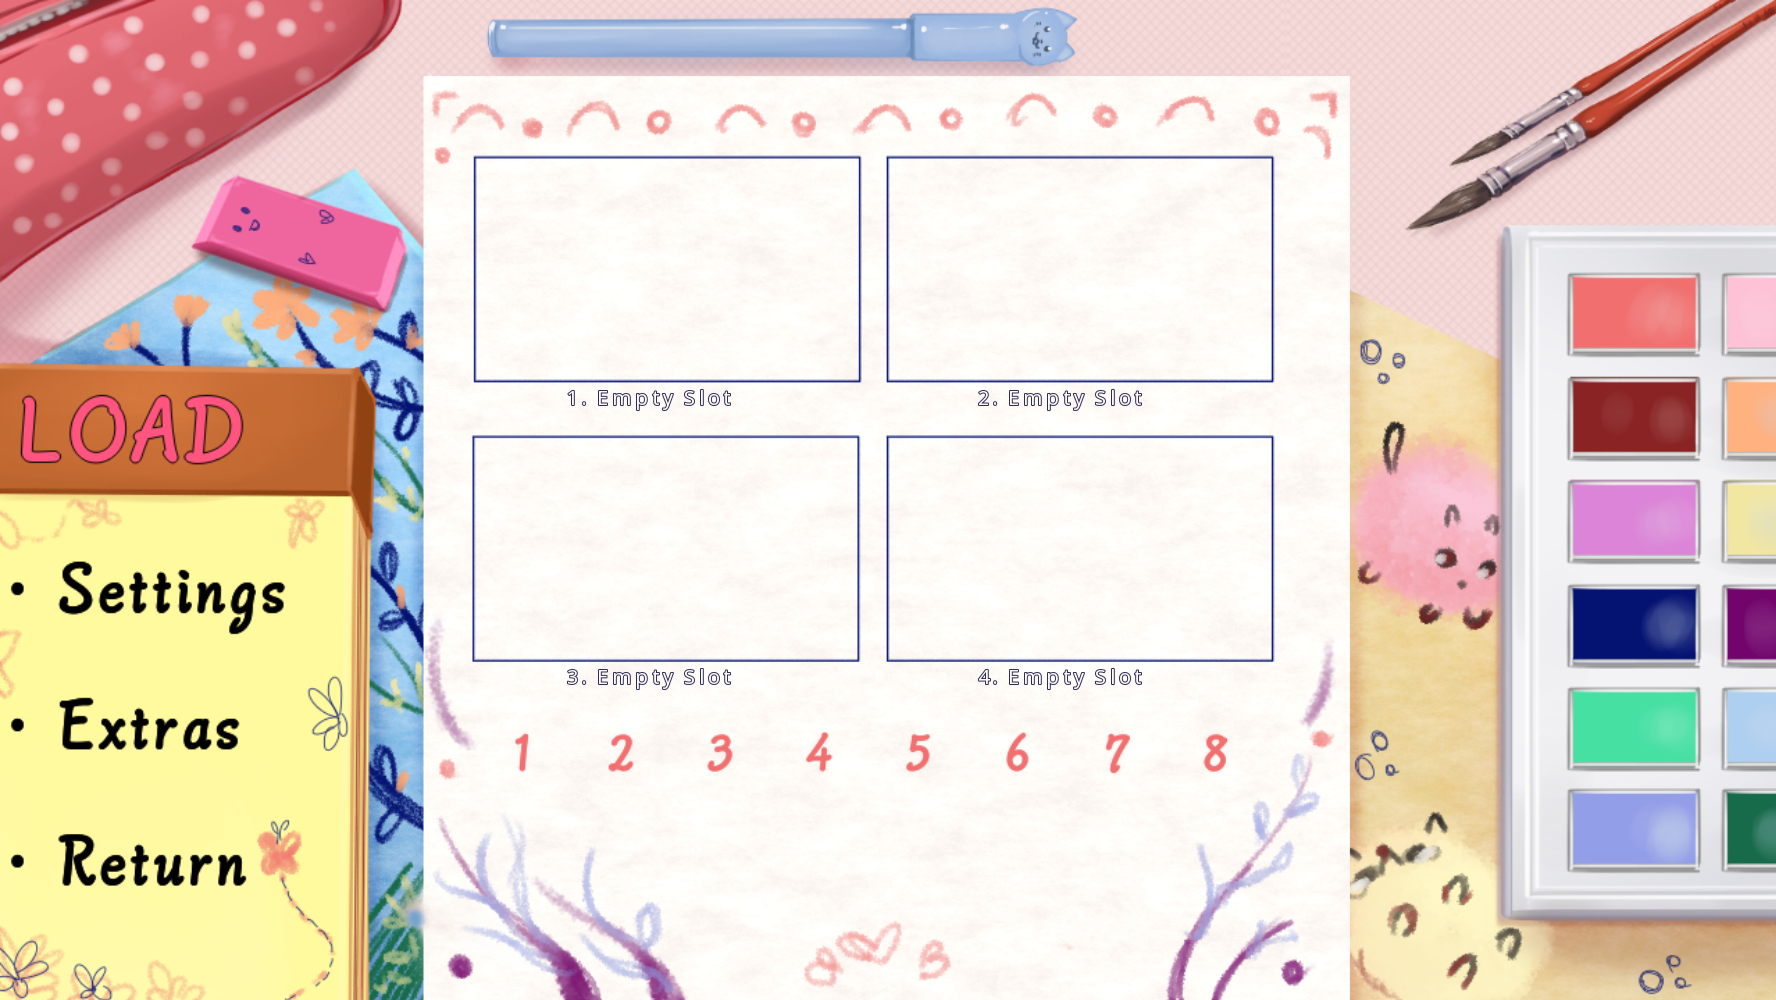 New load screen. The page looks like a sketchbook on a colorful table. The buttons are set over a notepad and have an average size on the left corner. There are paintings, brushes, and random materials scratched around.